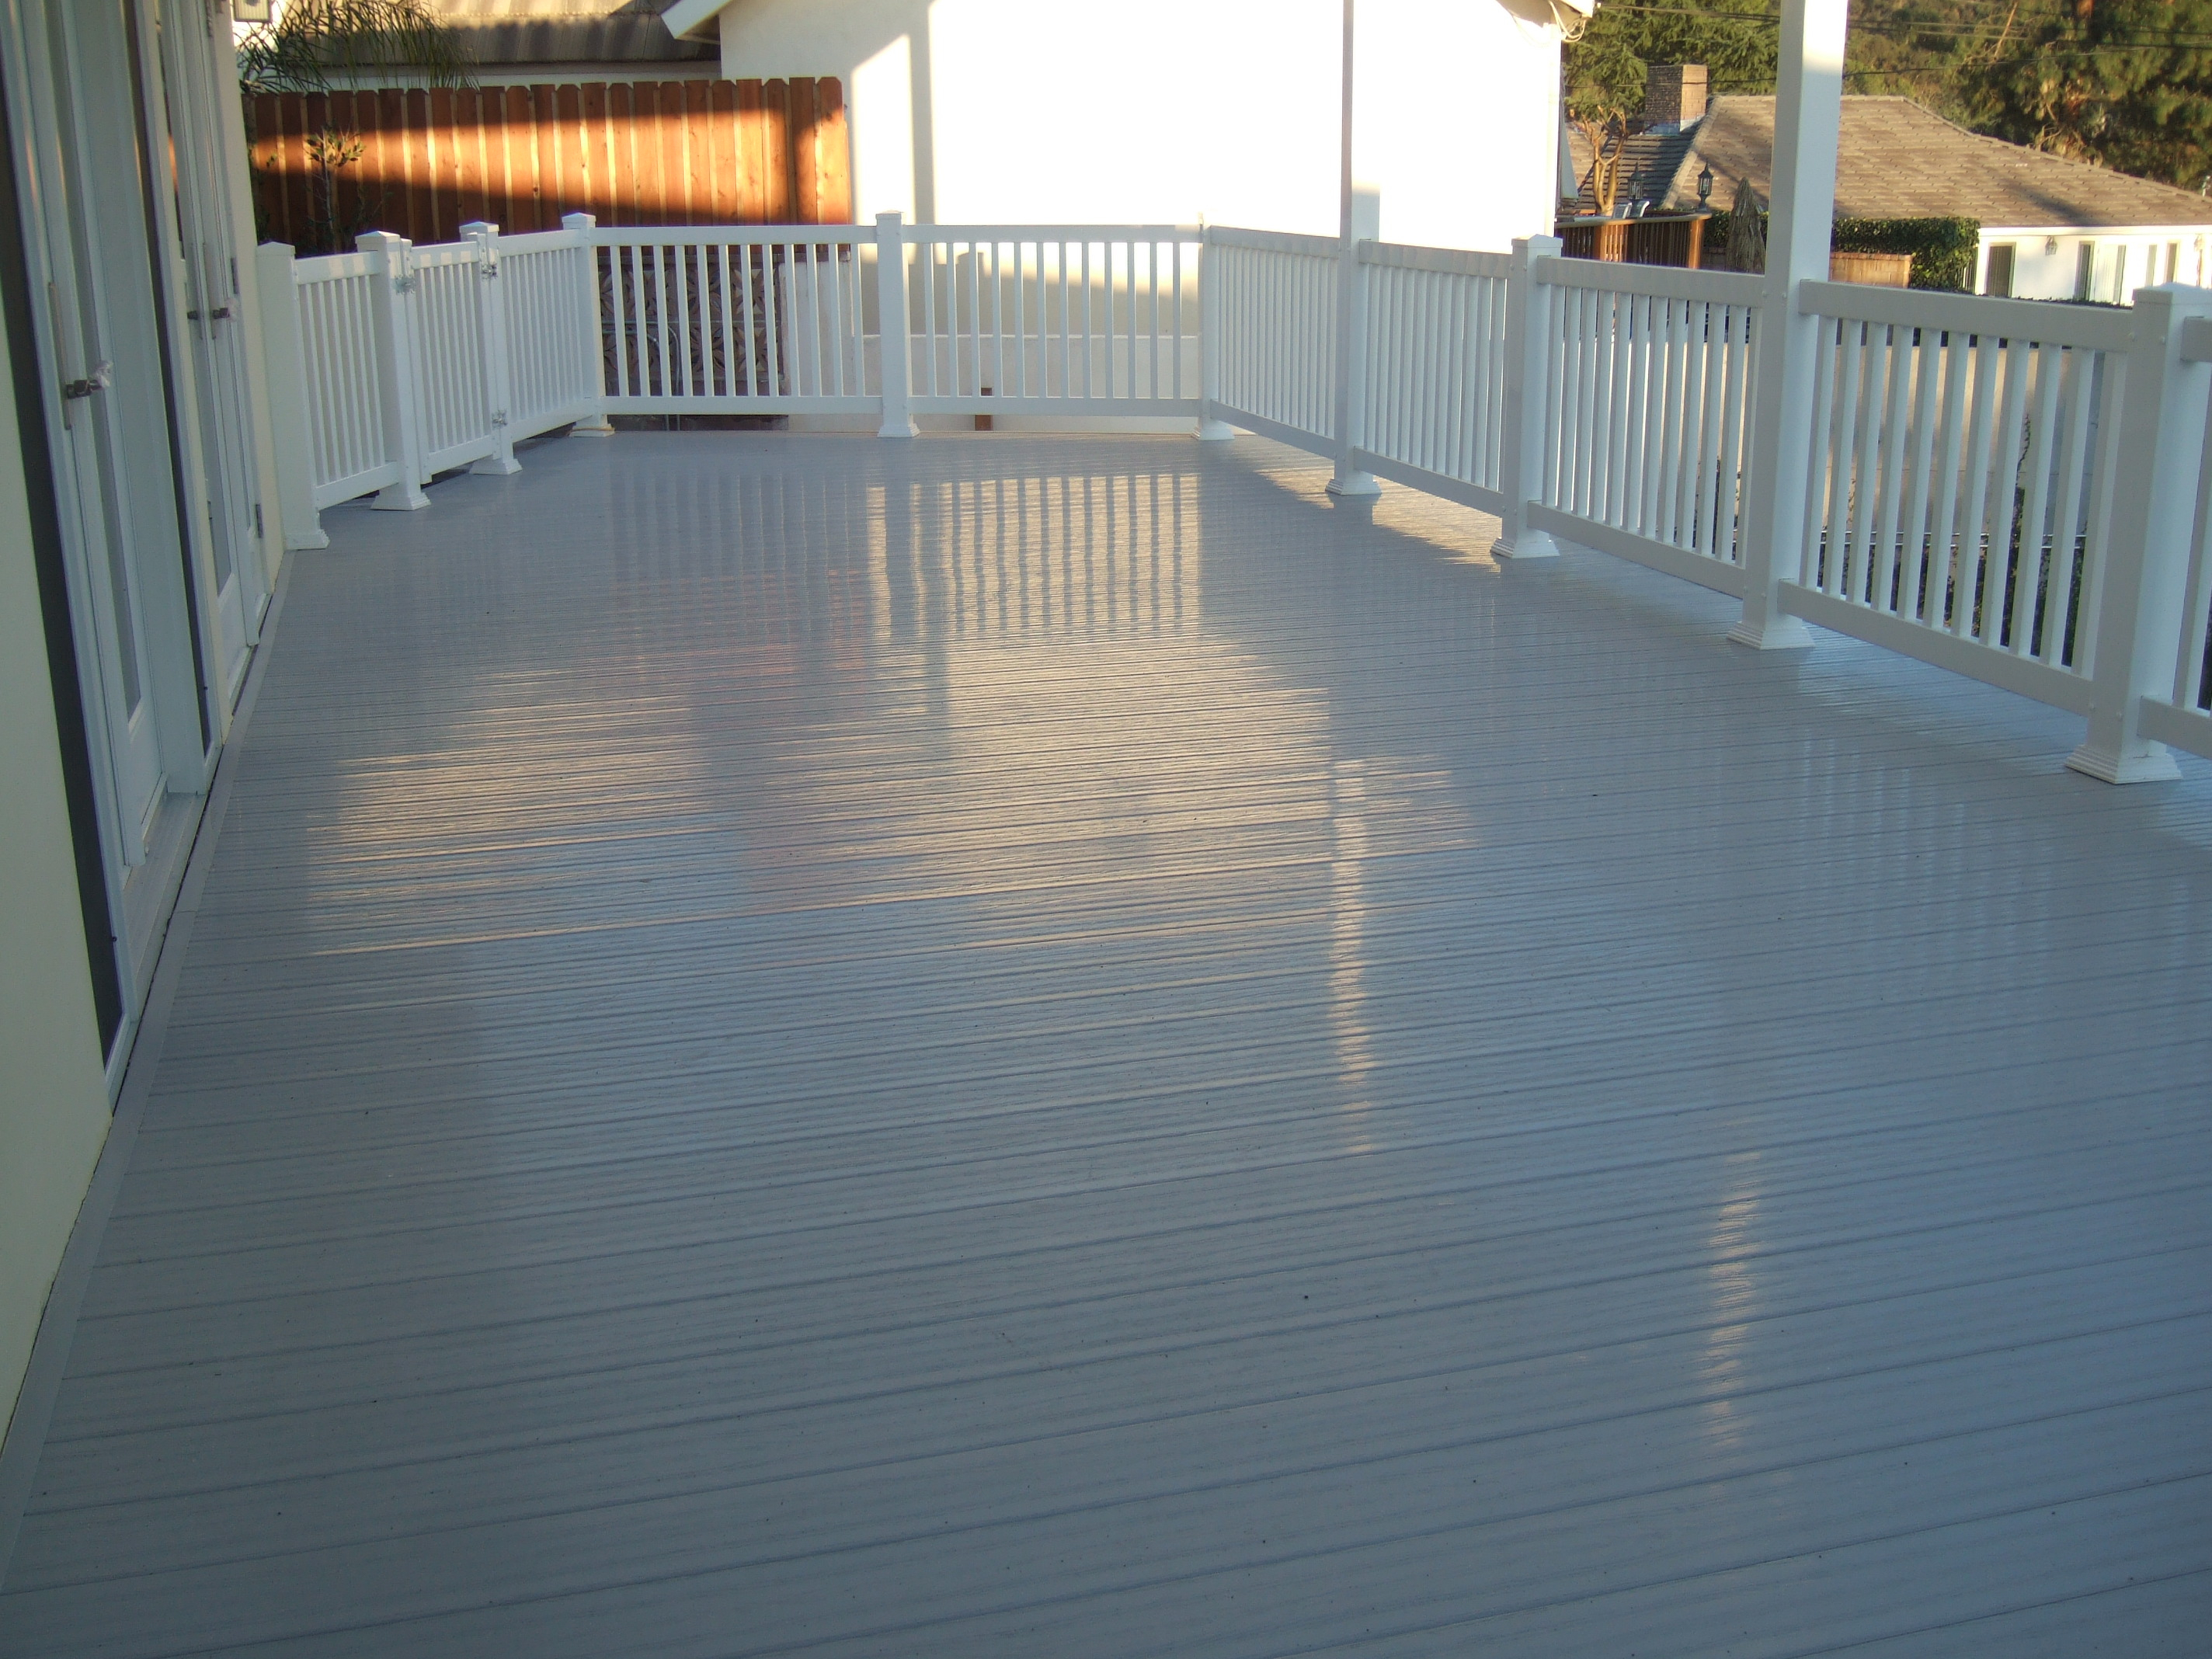 Decks Gng Vinyl Fencing And Patio Covers inside proportions 2848 X 2136